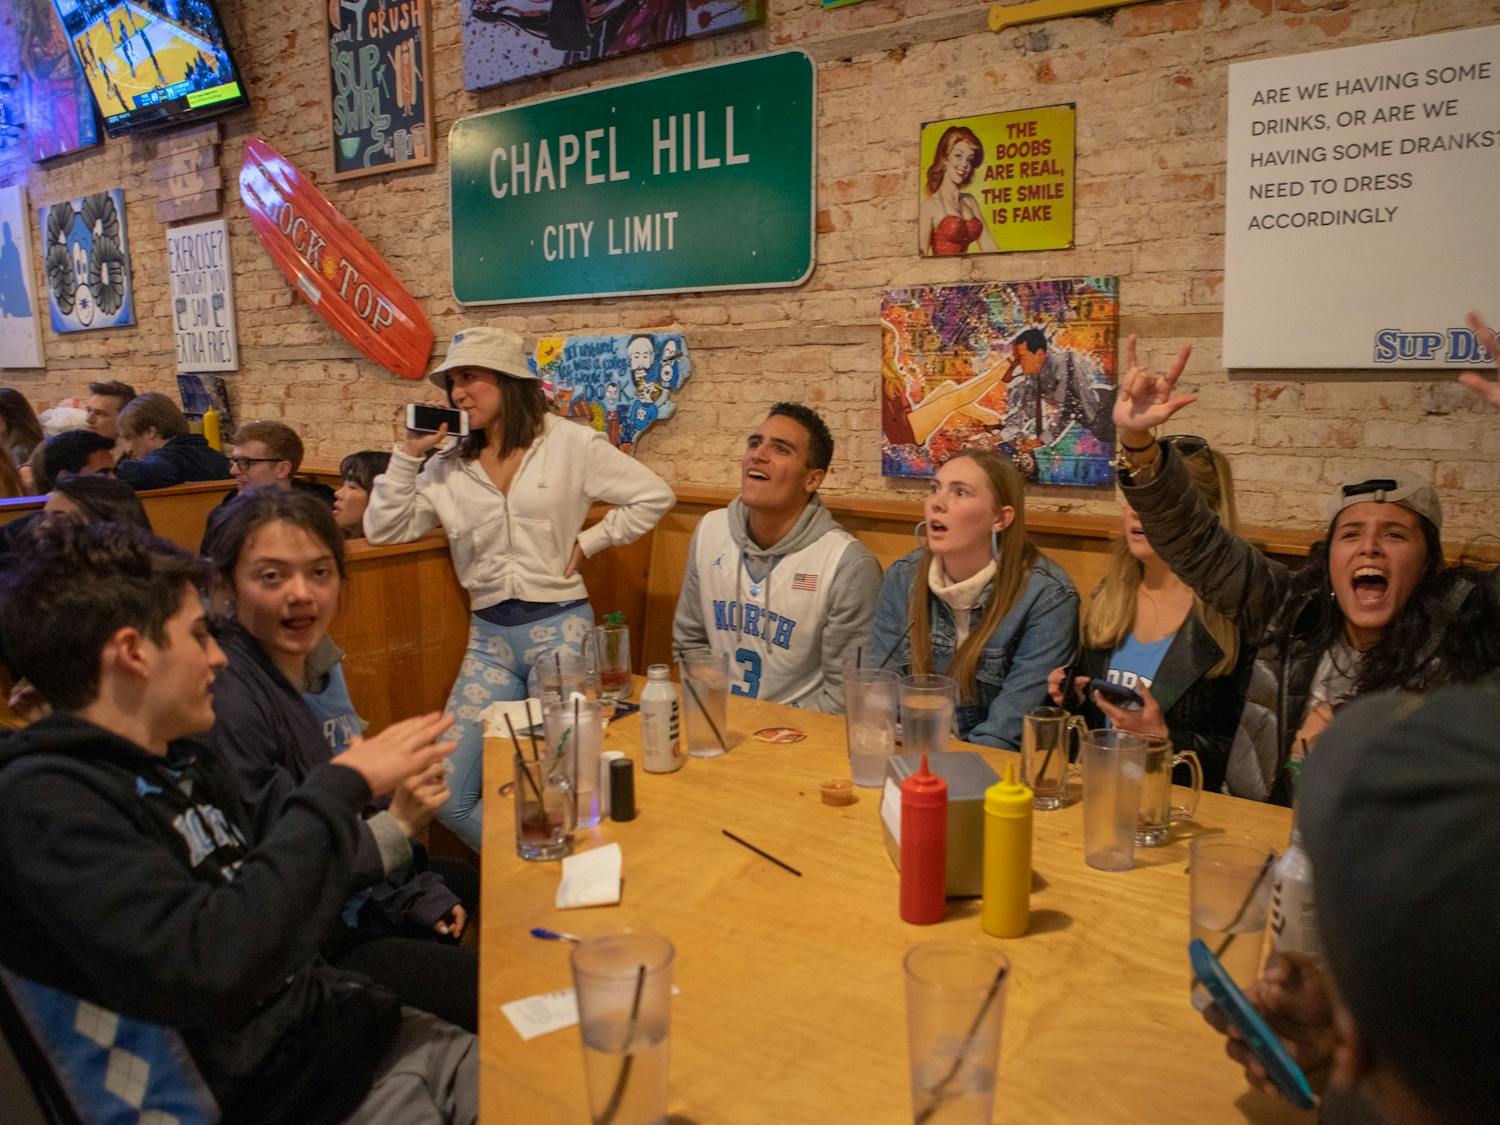 Spectators in Sup Dogs on Franklin Street cheer during UNC's game against Duke following the Tar Heels taking a 10-point lead on Sat. 8, 2020.  The Tar Heels lost to Duke 98-96 in overtime.